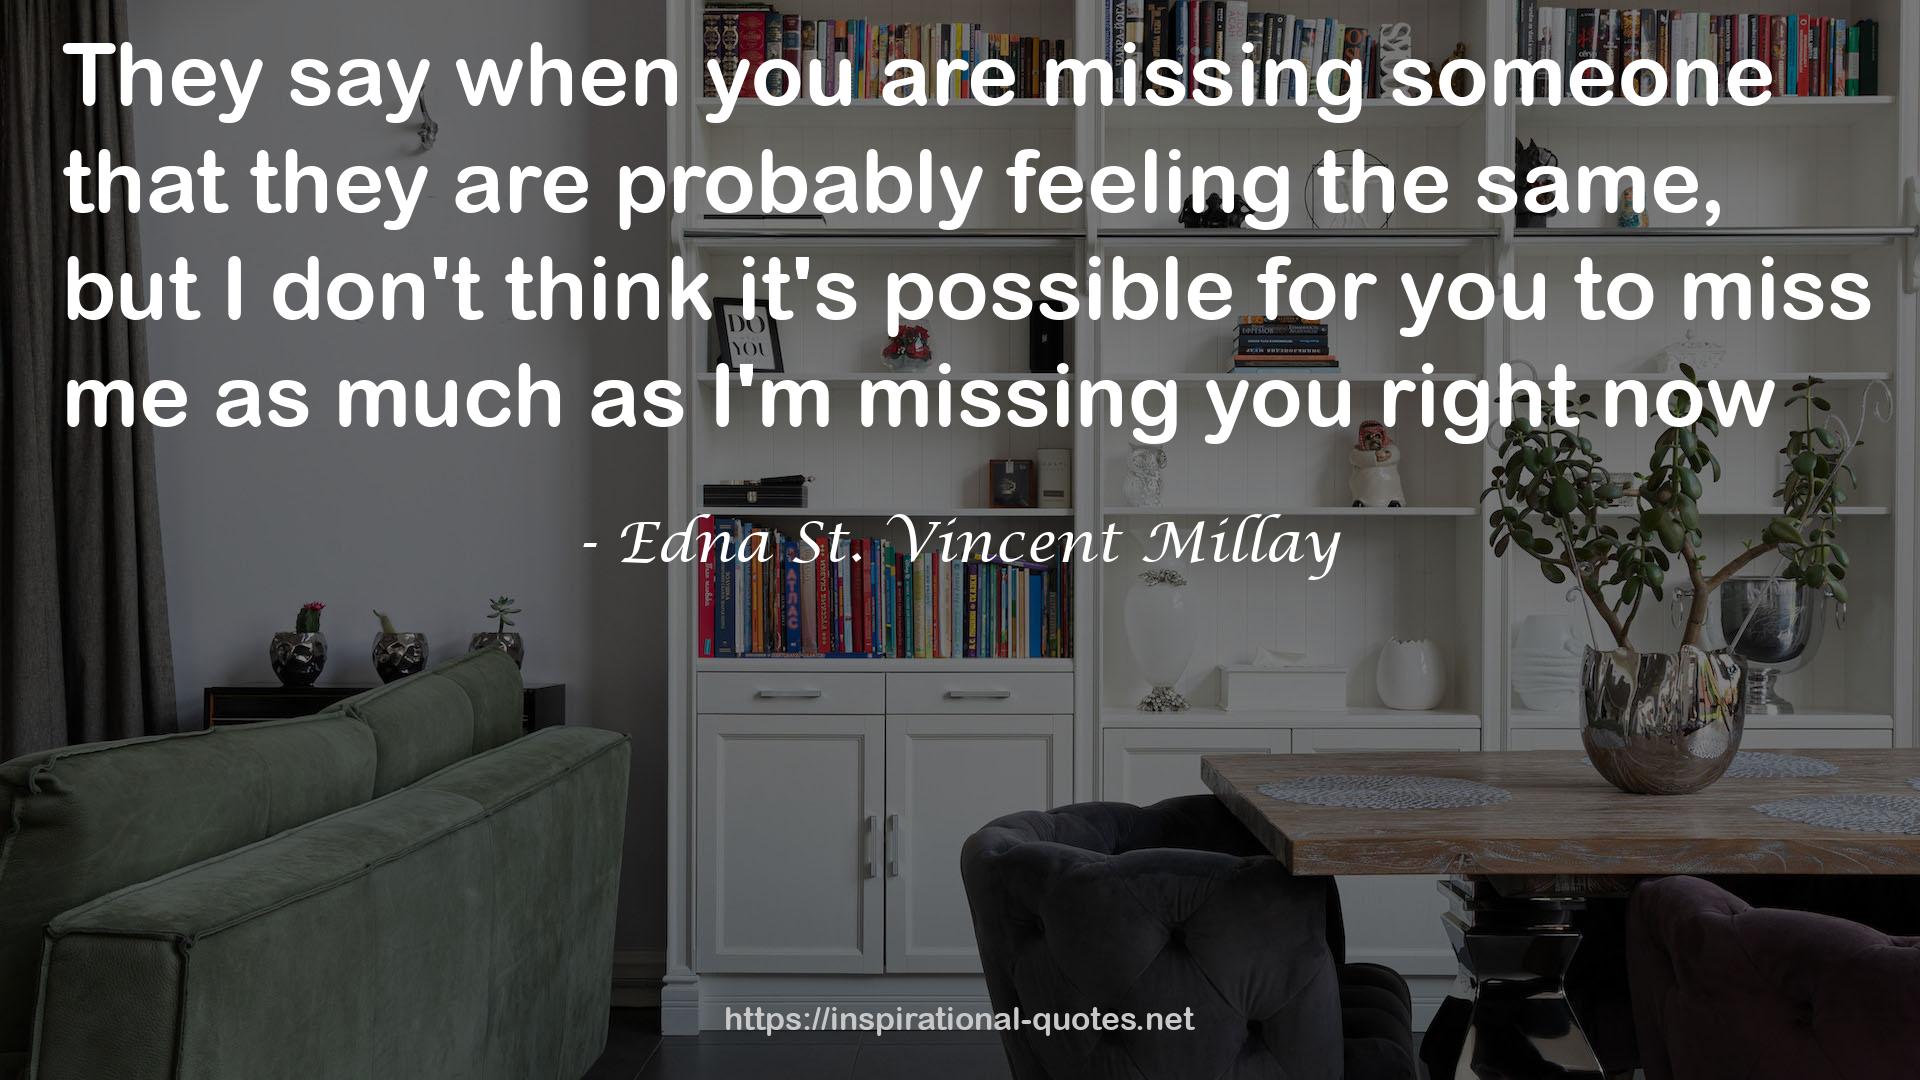 Edna St. Vincent Millay QUOTES